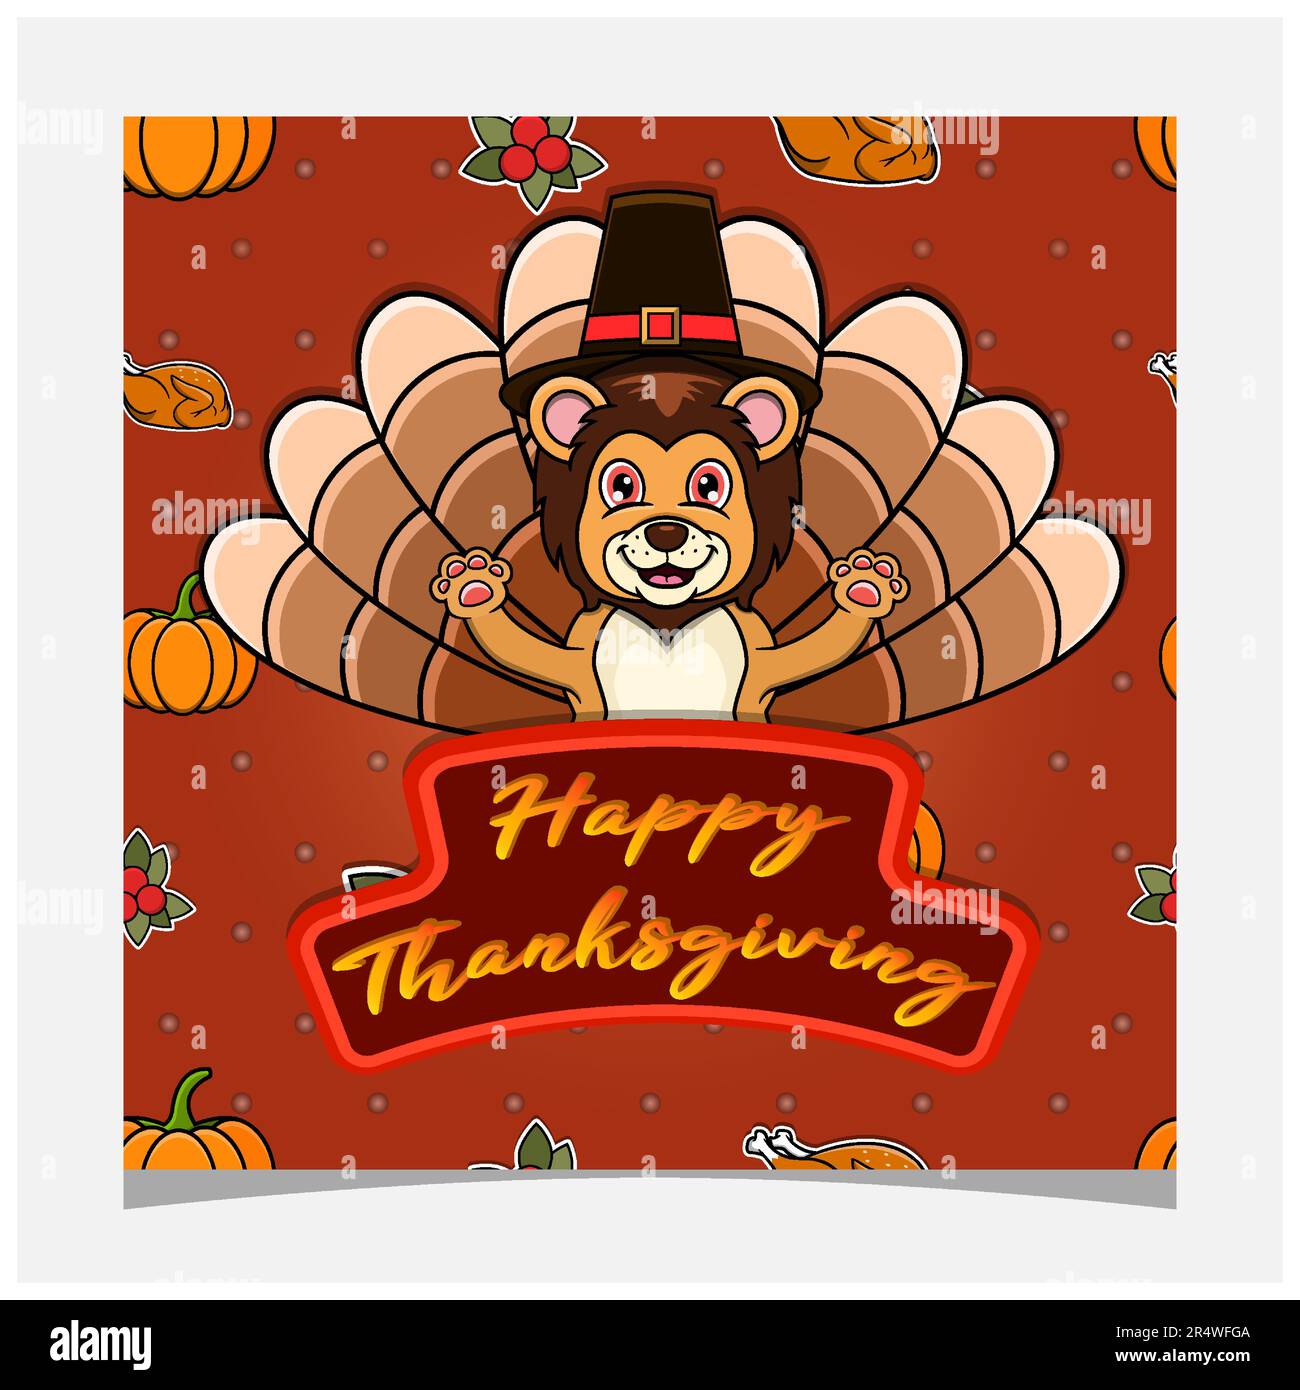 Happy Thanksgiving Card With Cute Lion Character Design. Greeting Card, Poster, Flyer and Invitation. Vector and Illustration. Stock Vector